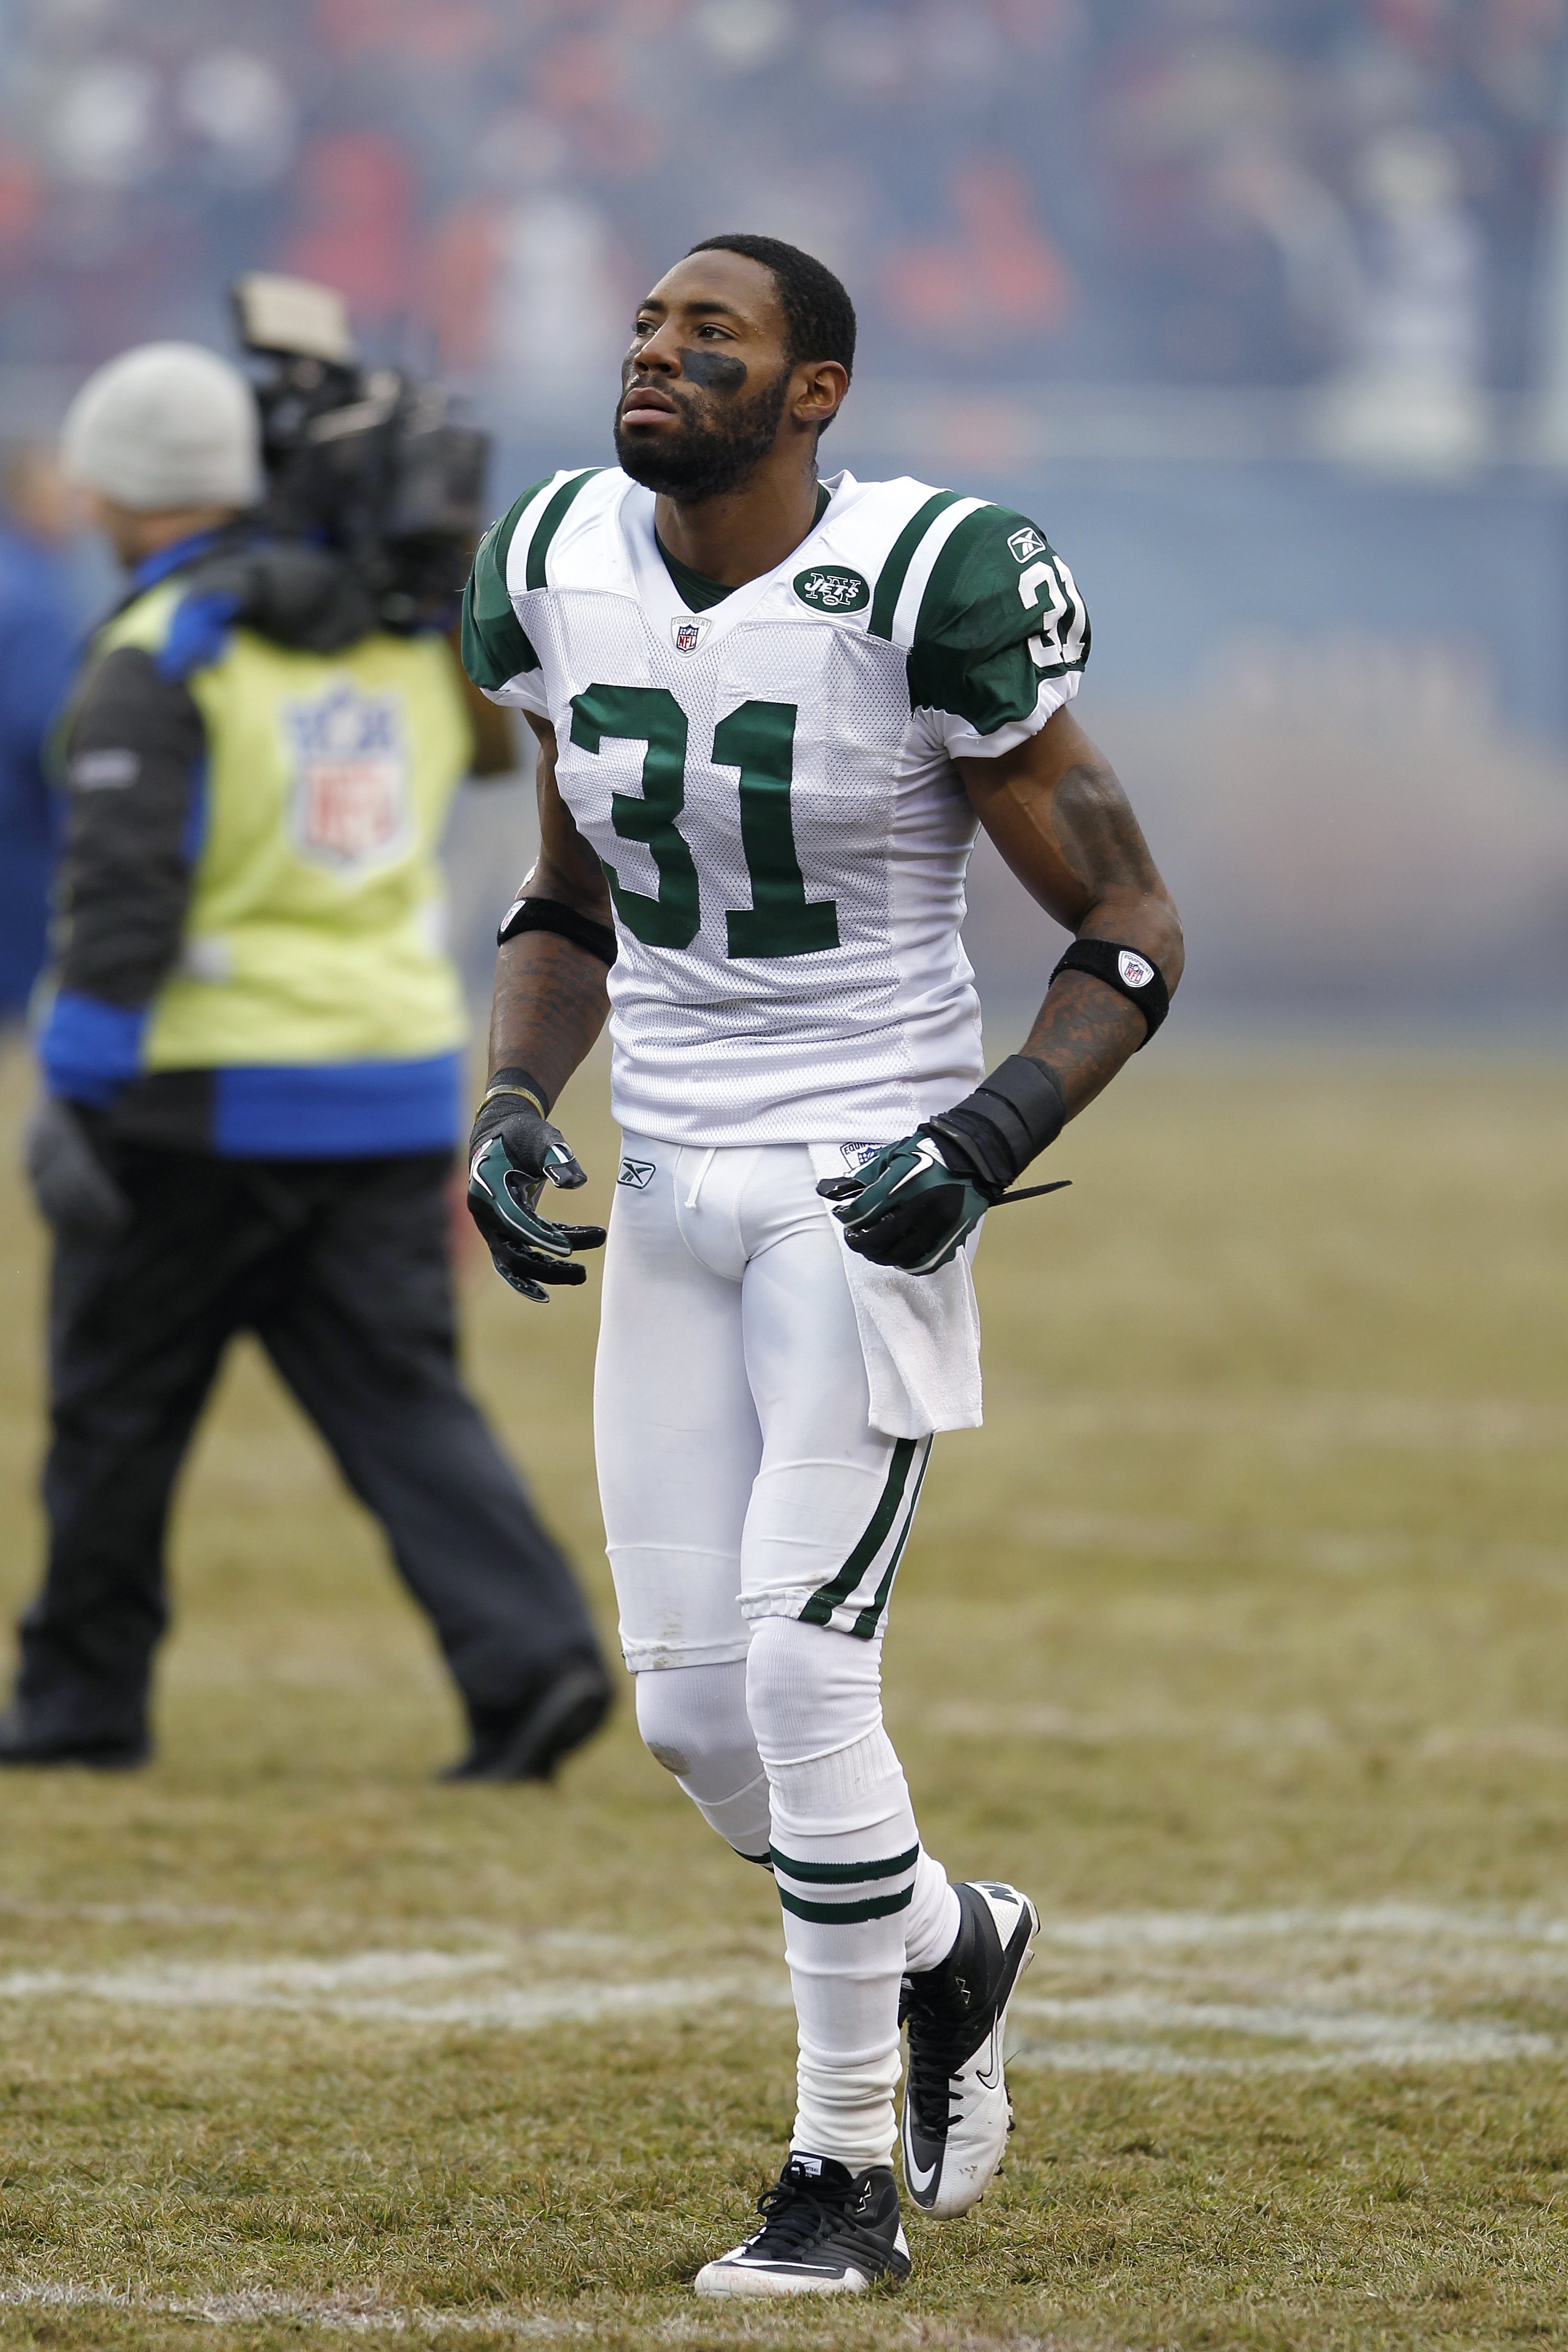 Antonio Cromartie #31 of the New York Jets looks on during the game against the Chicago Bears at Soldier Field on December 26, 2010 in Chicago, Illinois | Photo: GettyImages